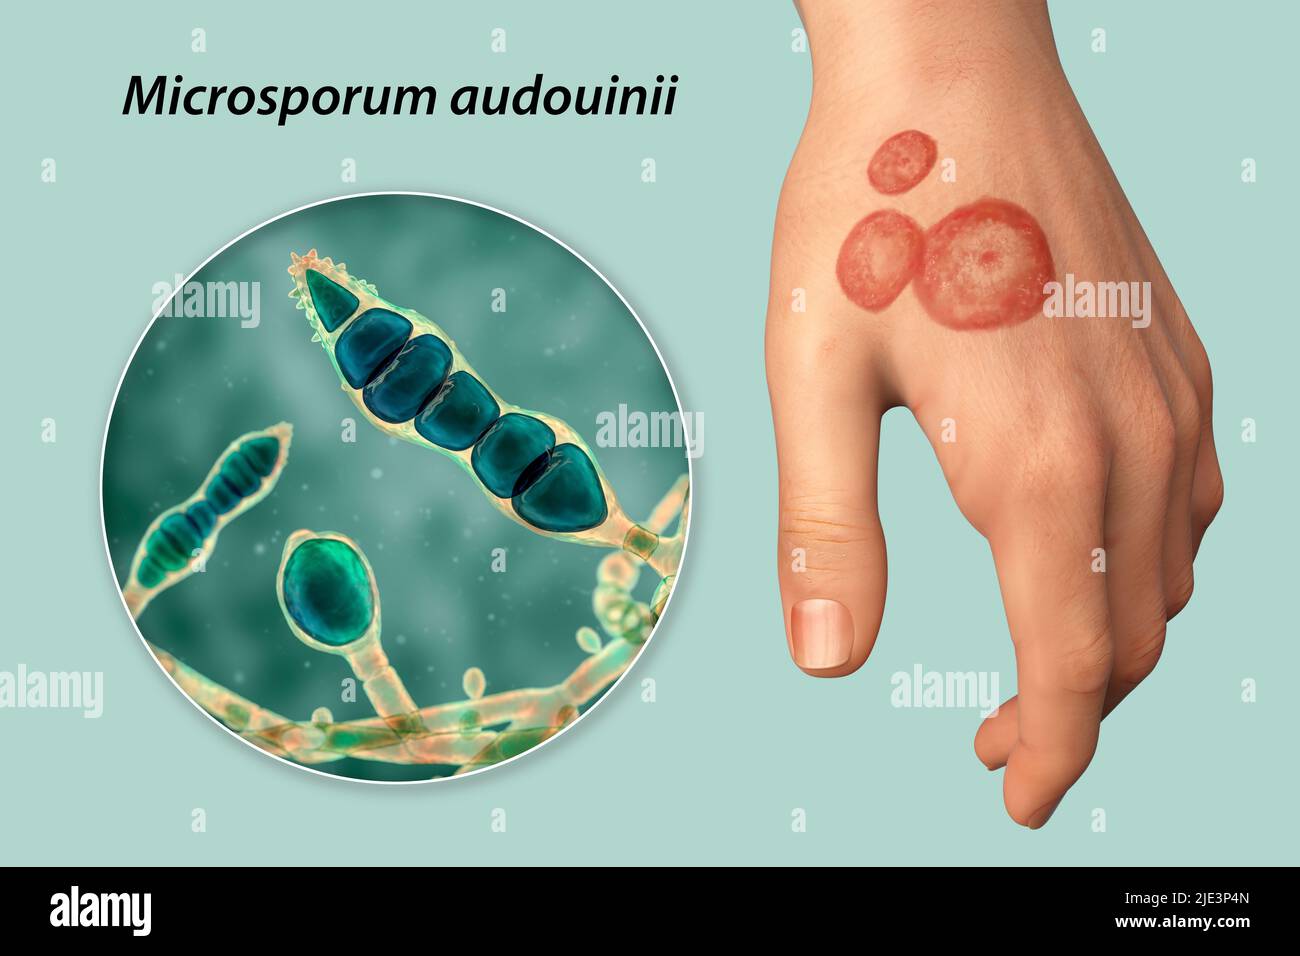 Fungal infection on a man's hand, illustration. Known as ringworm infection, or tinea manuum. It can be caused by various fungi, including Microsporum audouinii. It causes severe itching. The disease is highly contagious, and can be spread by direct contact or by contact with contaminated material. Treatment is with antifungal drugs. Stock Photo